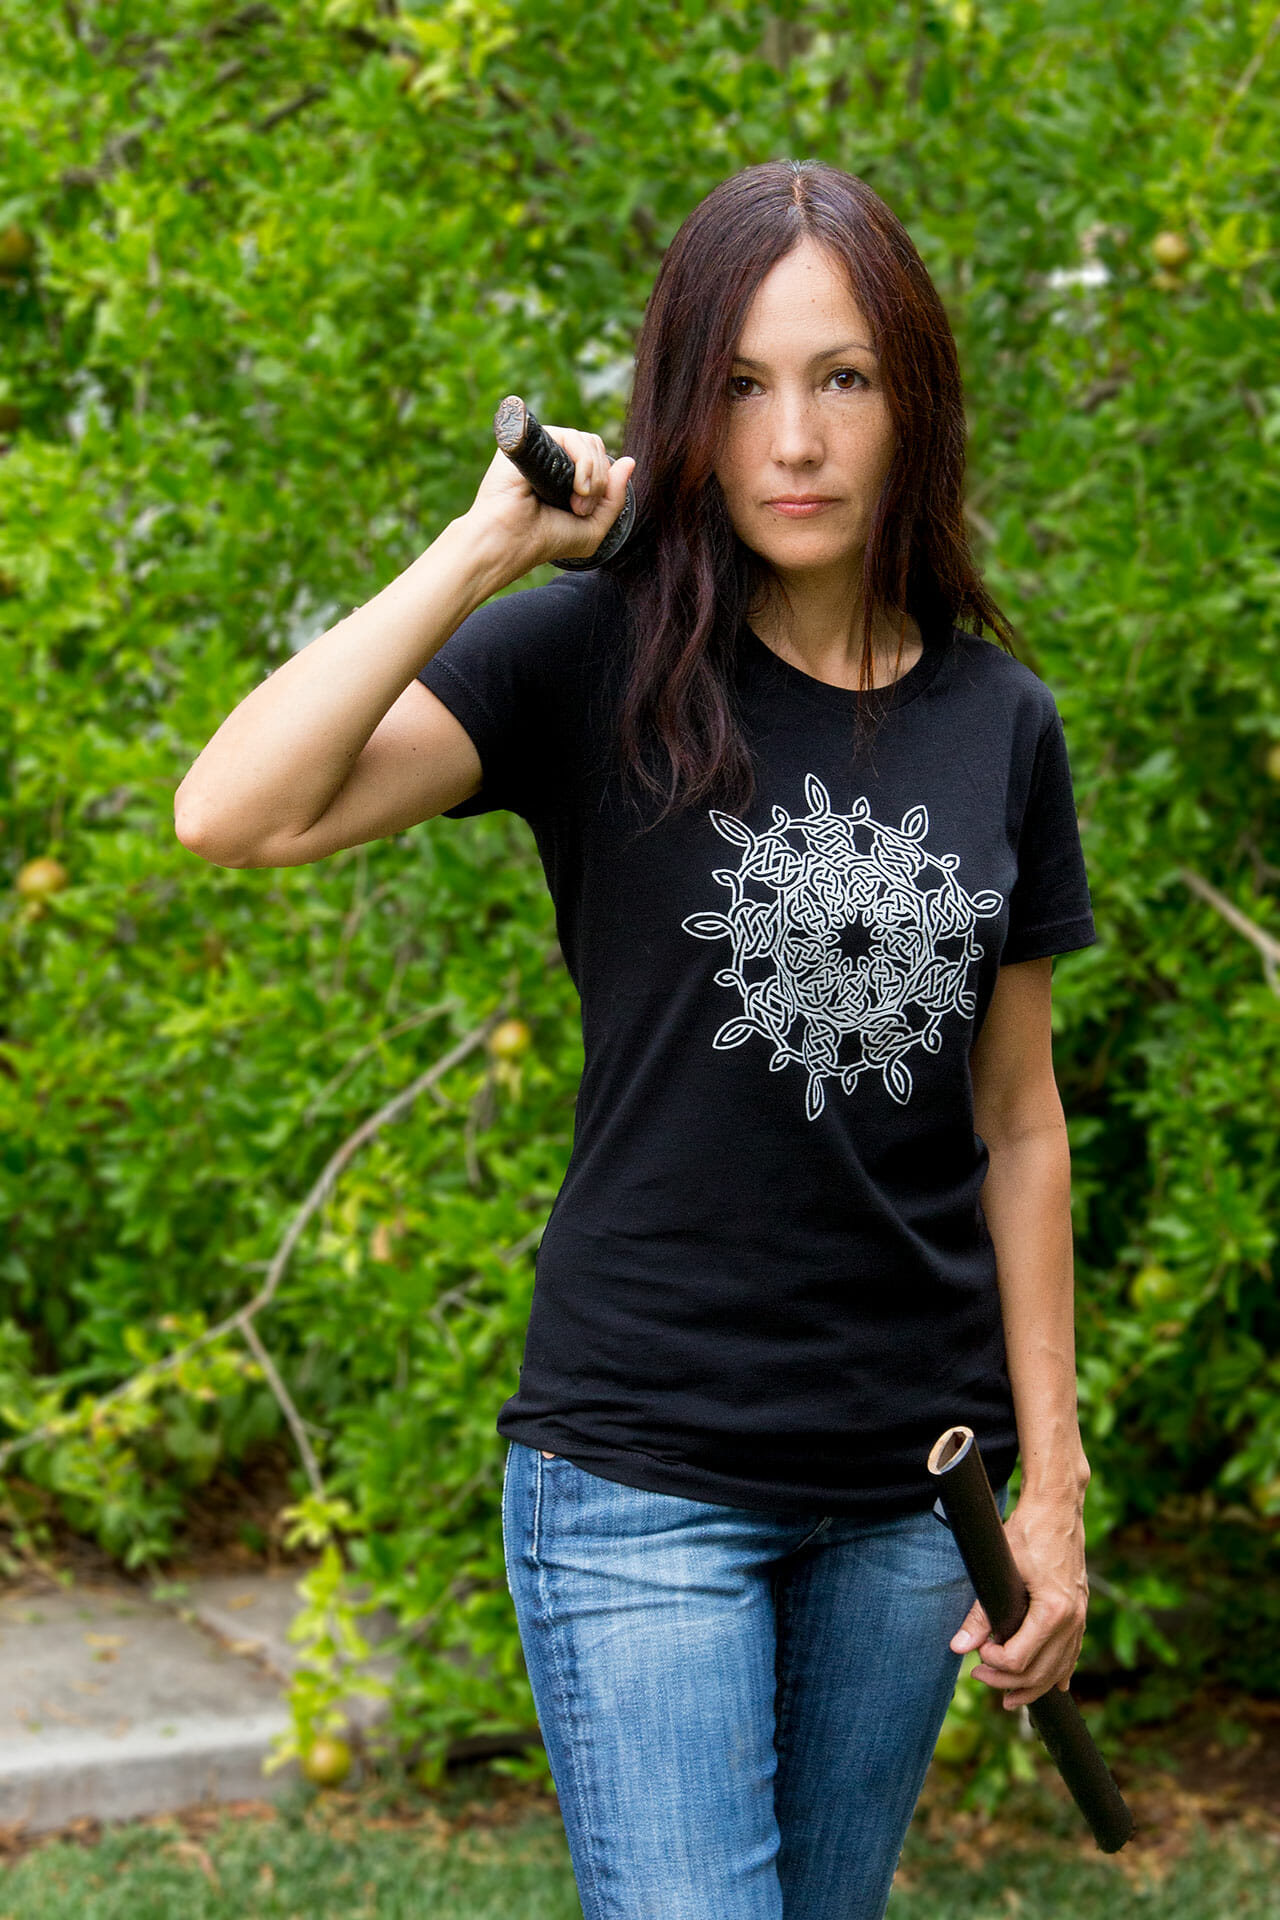 Silver Snowflake Celtic Knotwork Women's Fitted T-Shirt